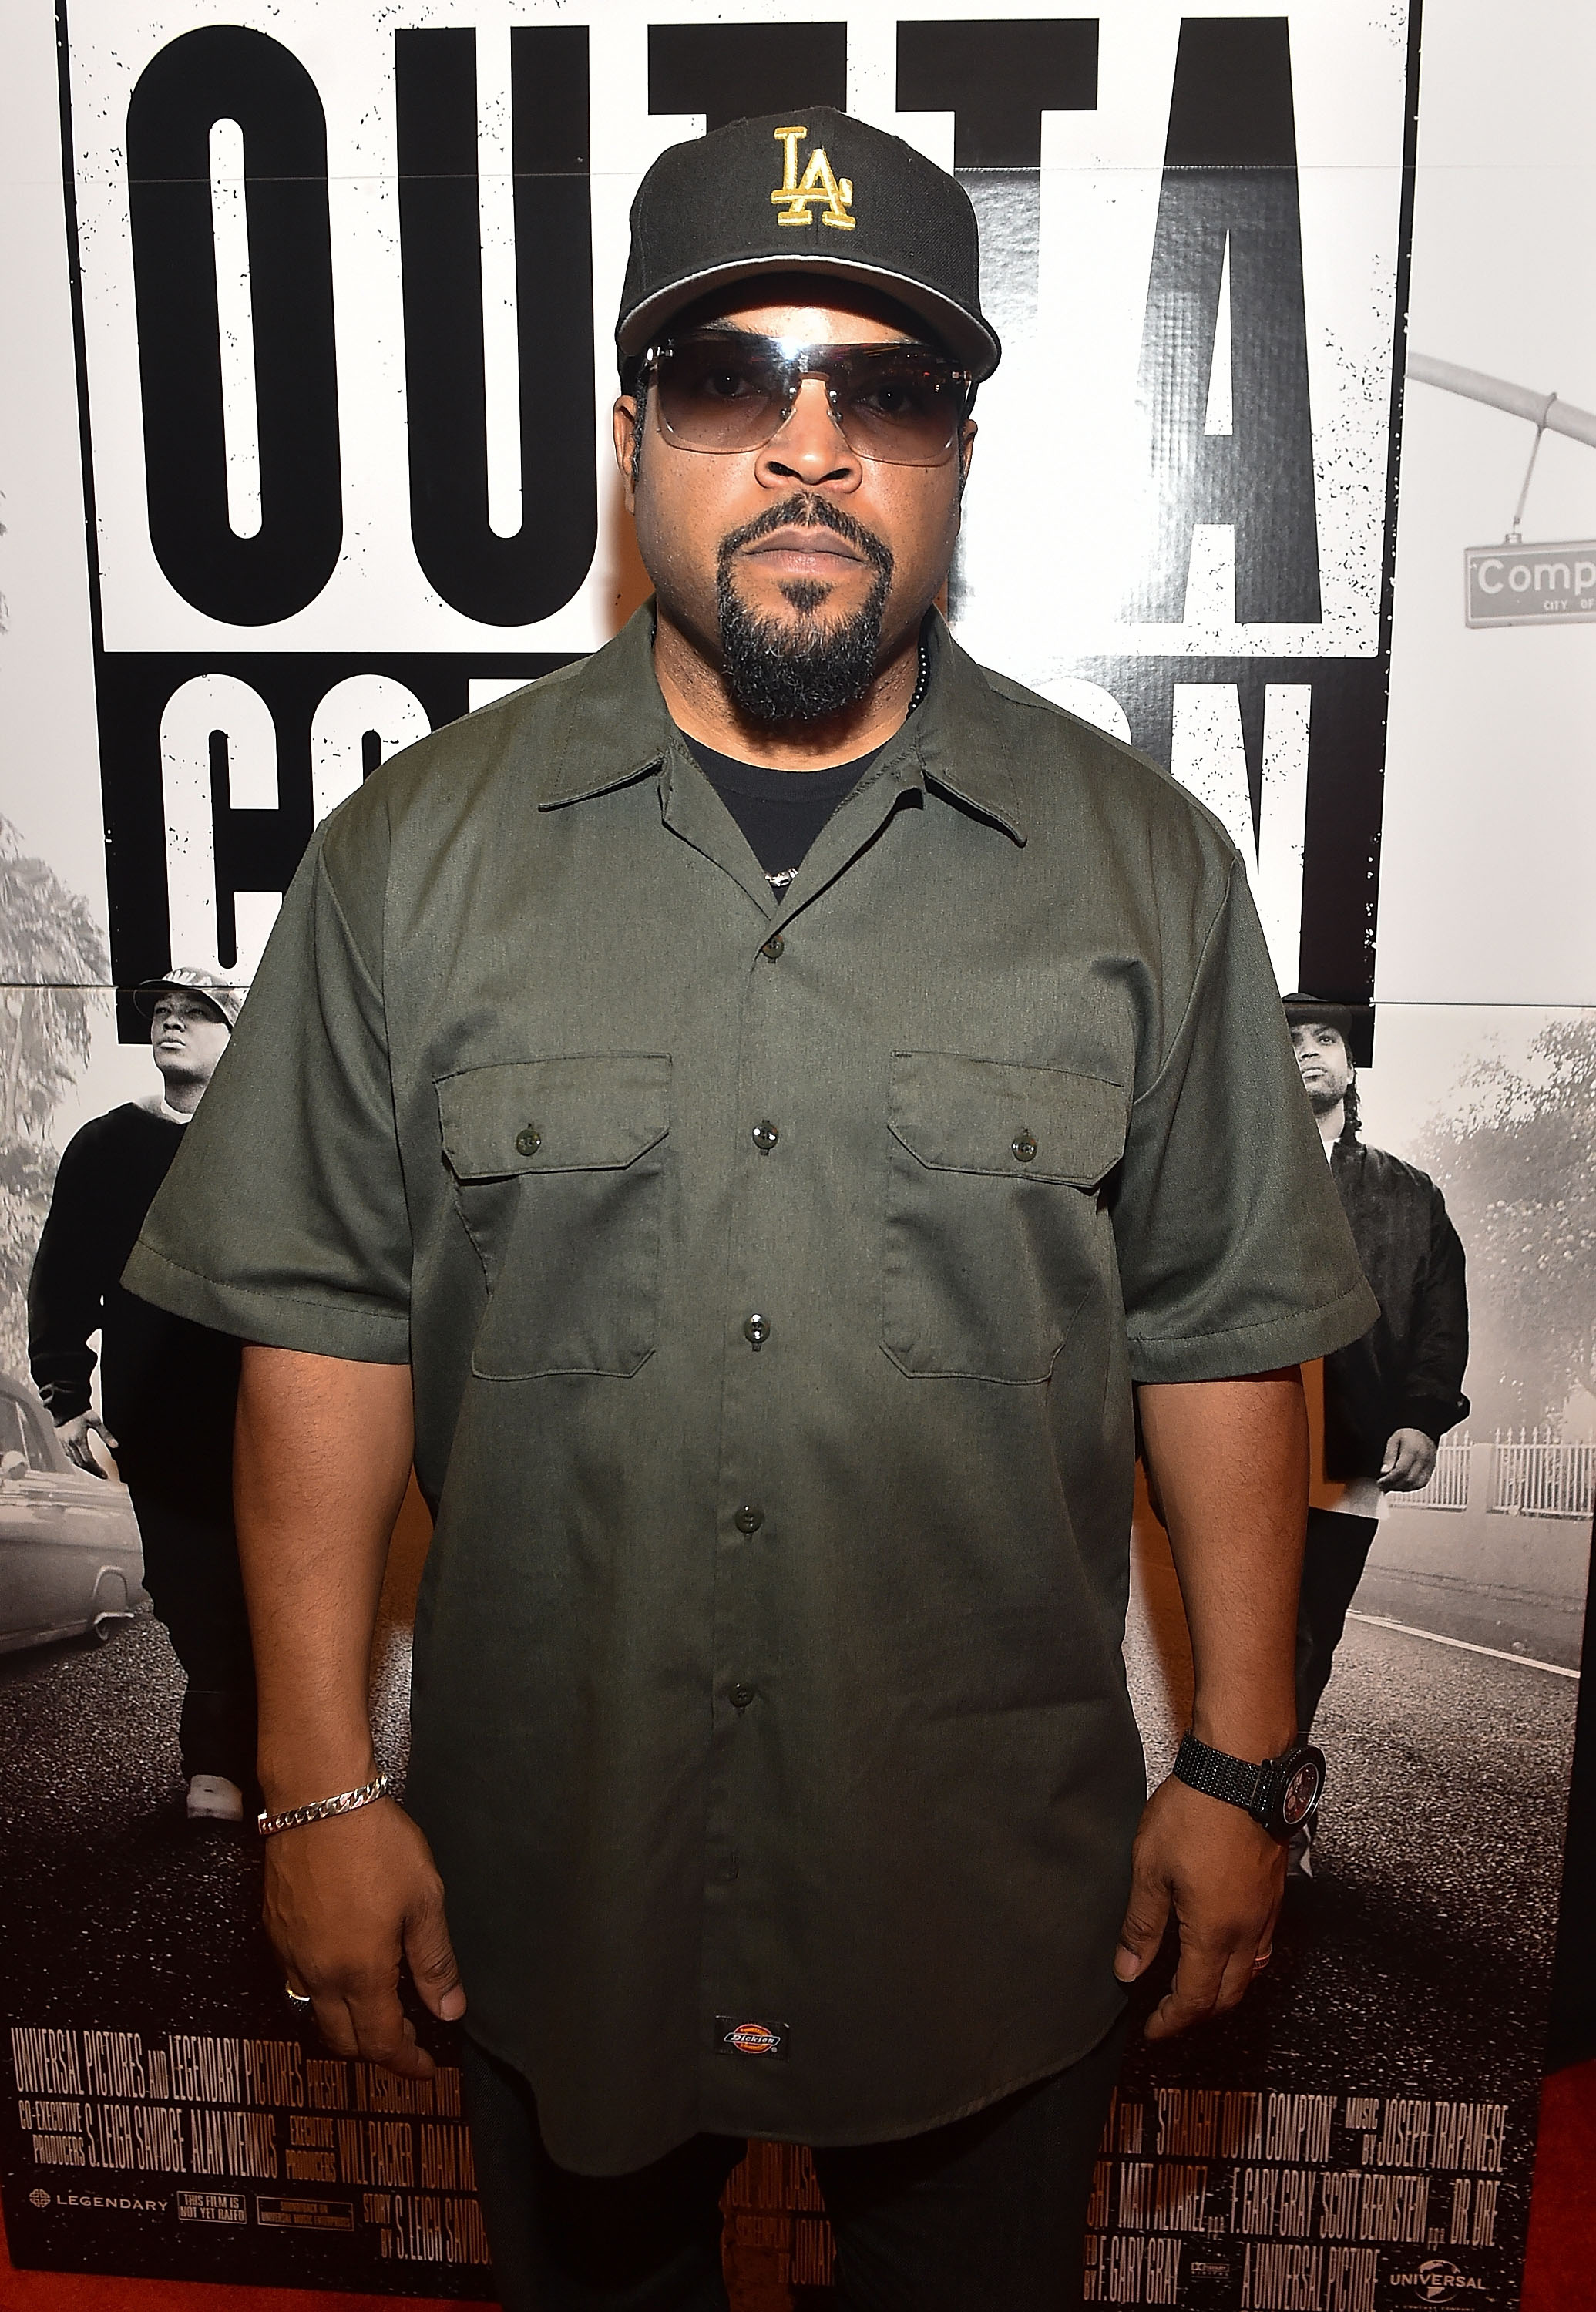 ATLANTA, GA - JULY 24: Rapper/actor Ice Cube attends "Straight Outta Compton" VIP Screening With Director/ Producer F. Gary Gray, Producer Ice Cube, Executive Producer Will Packer, And Cast Members at Regal Atlantic Station on July 24, 2015 in Atlanta, Georgia. (Photo by Paras Griffin/Getty Images for Universal Pictures)